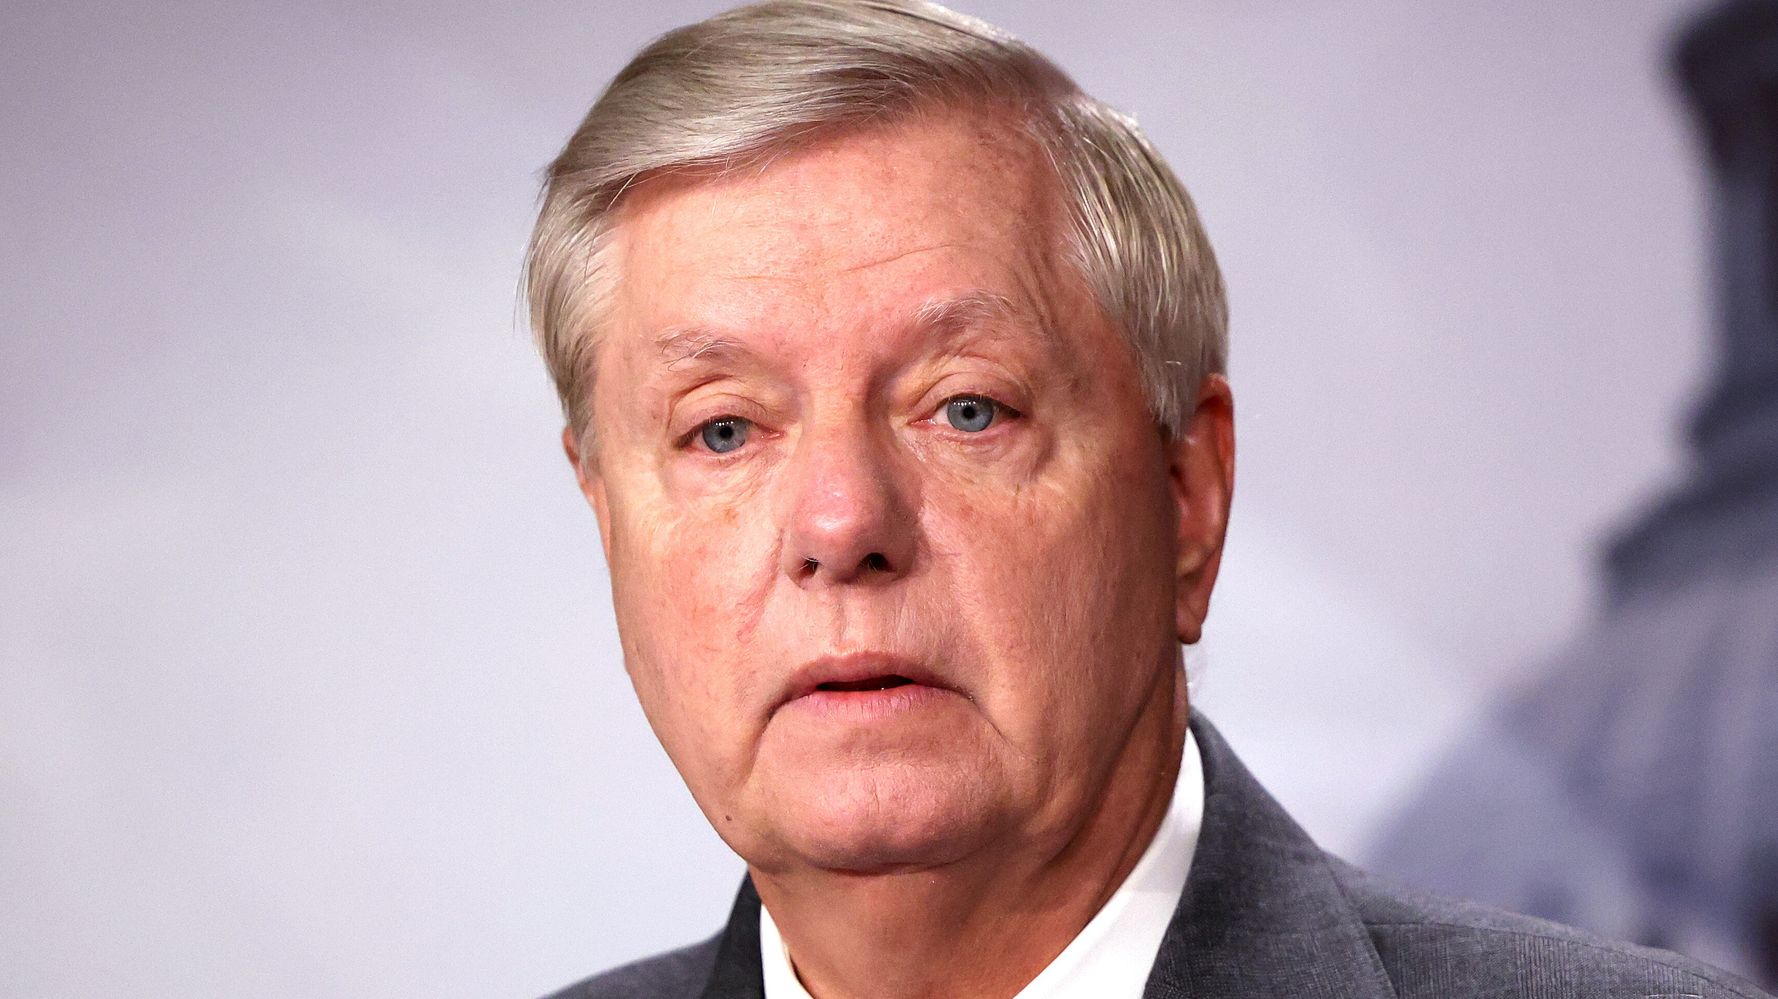 Sen. Lindsey Graham Urges People To Get Vaccinated After He Recovers From COVID-19